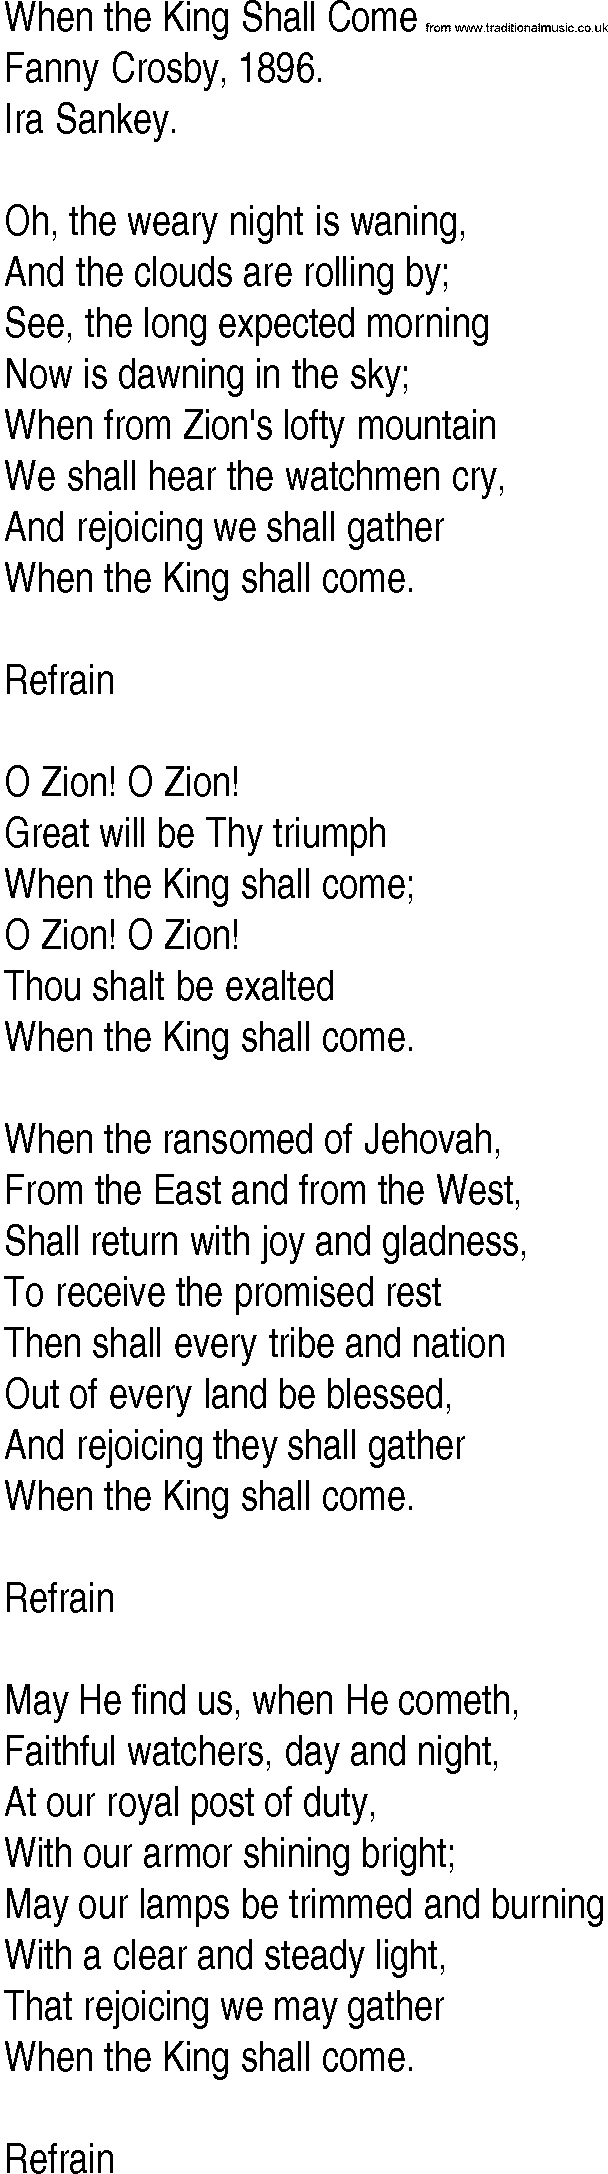 Hymn and Gospel Song: When the King Shall Come by Fanny Crosby lyrics